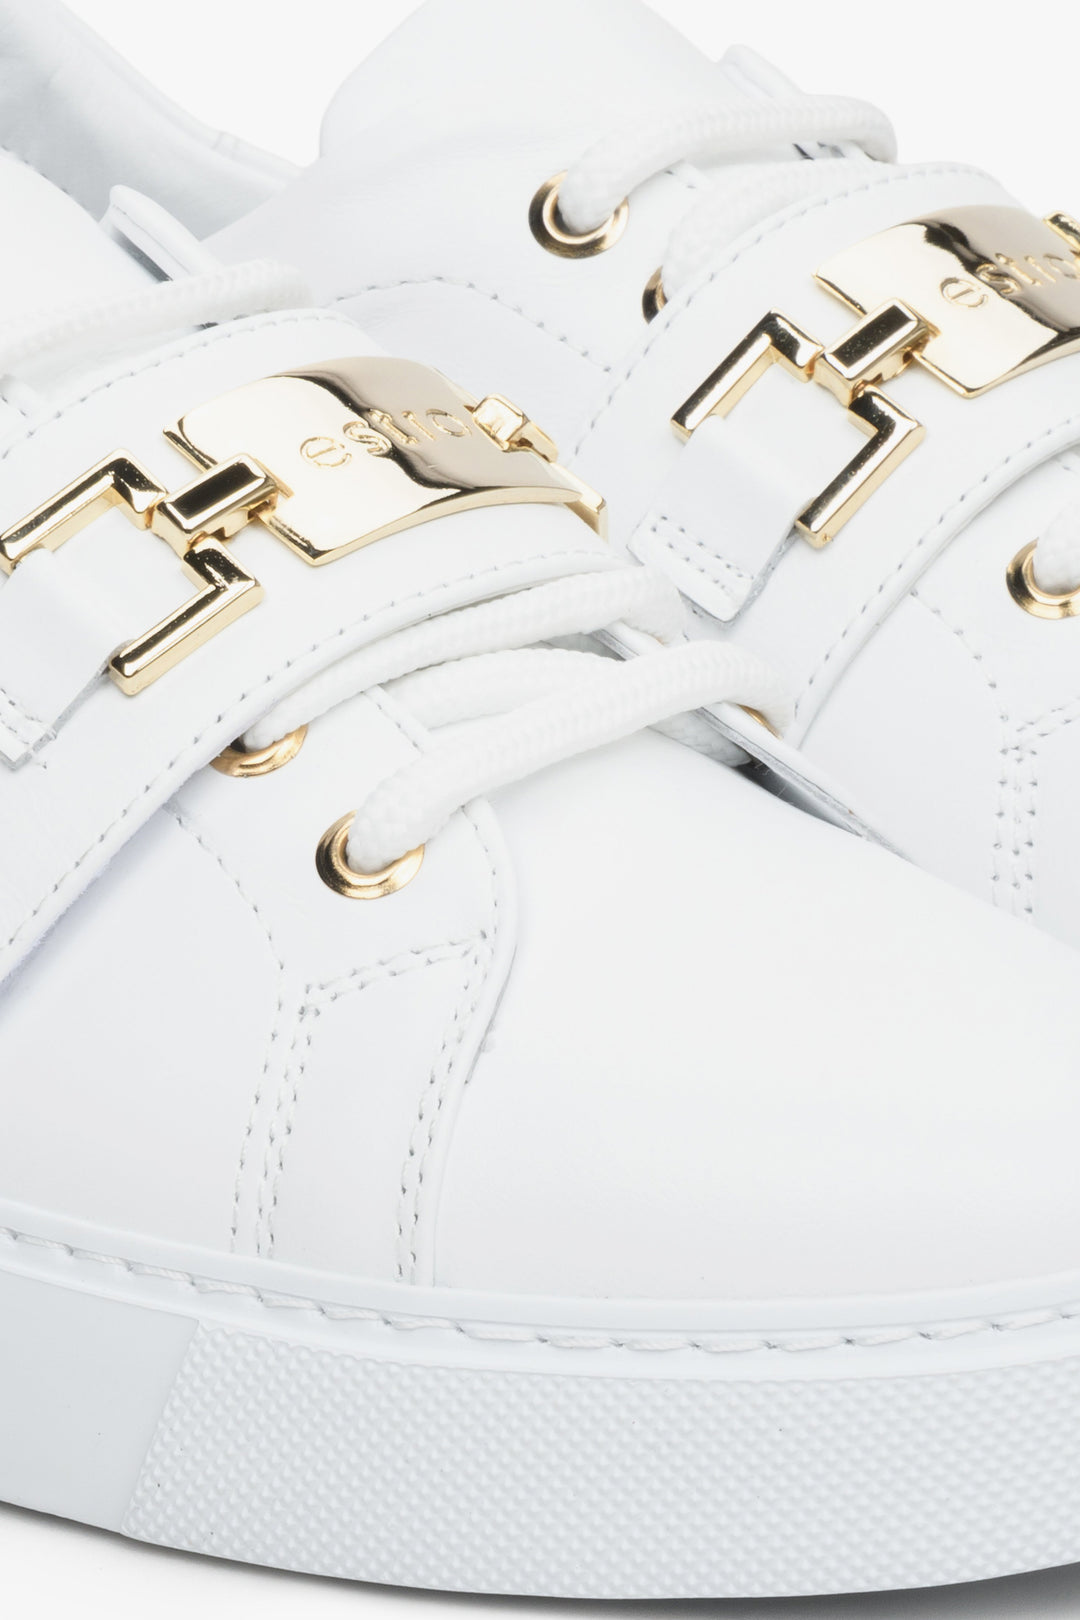 Women's white leather sneakers with a gold embellishment - close-up on the details.